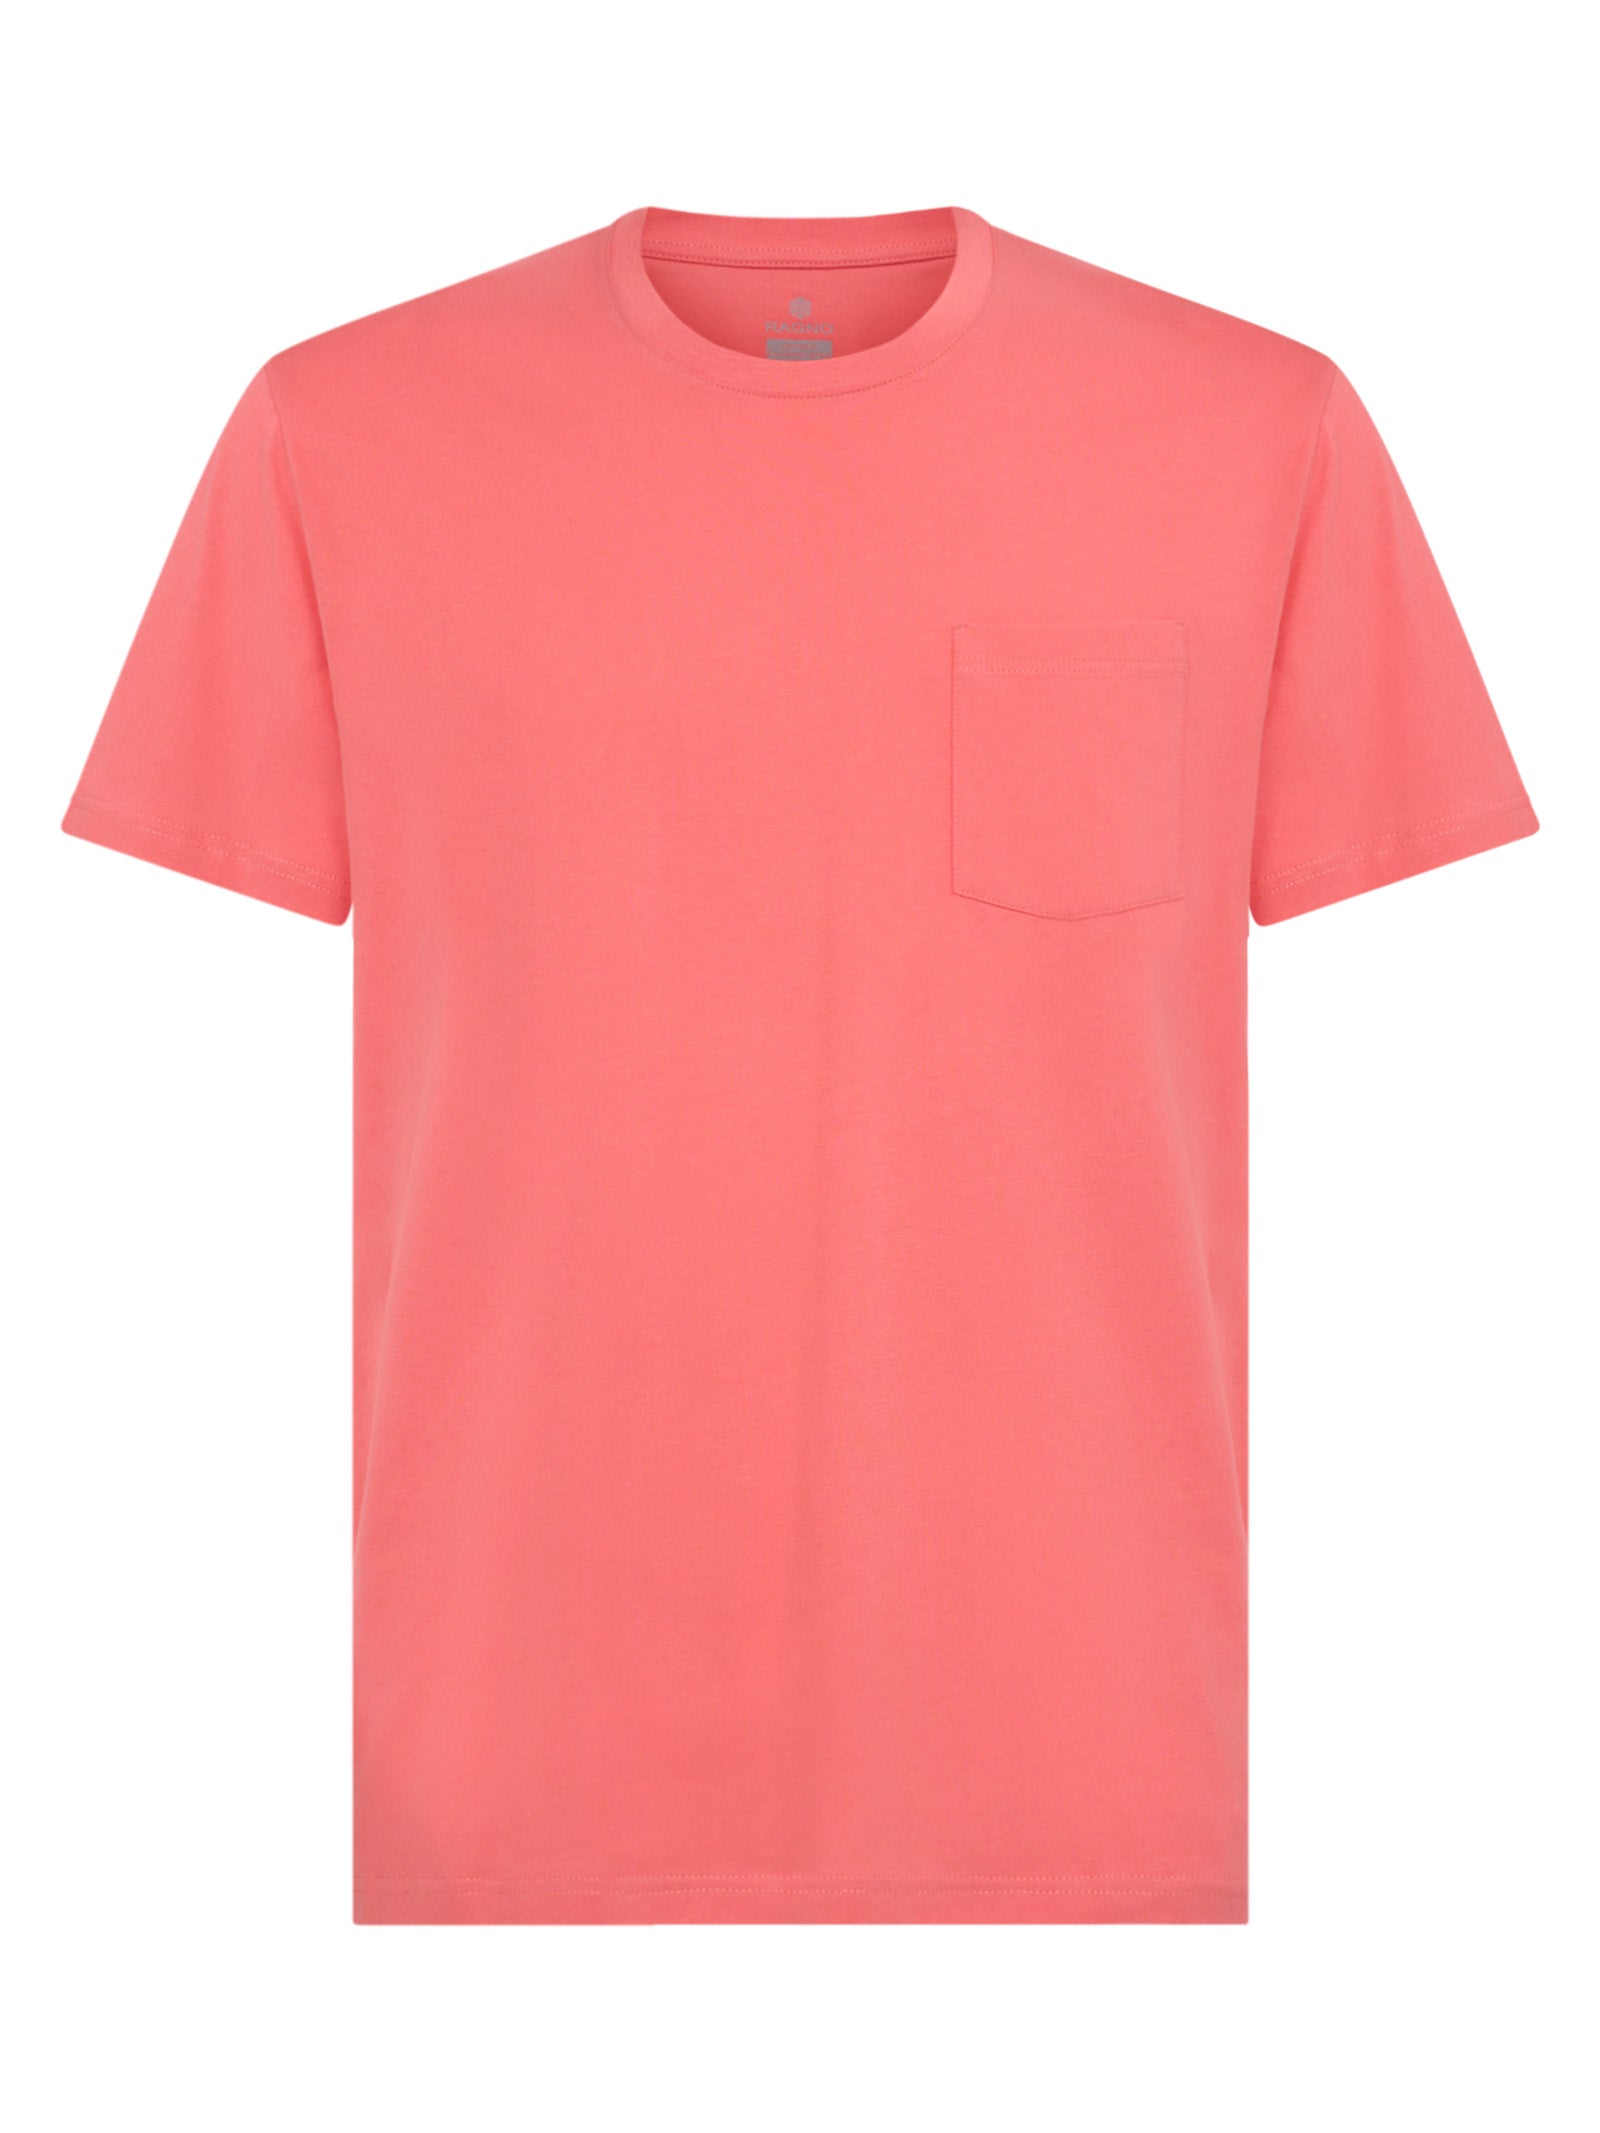 T-shirt in Compact Eco Cotton Jersey -  - Ragno